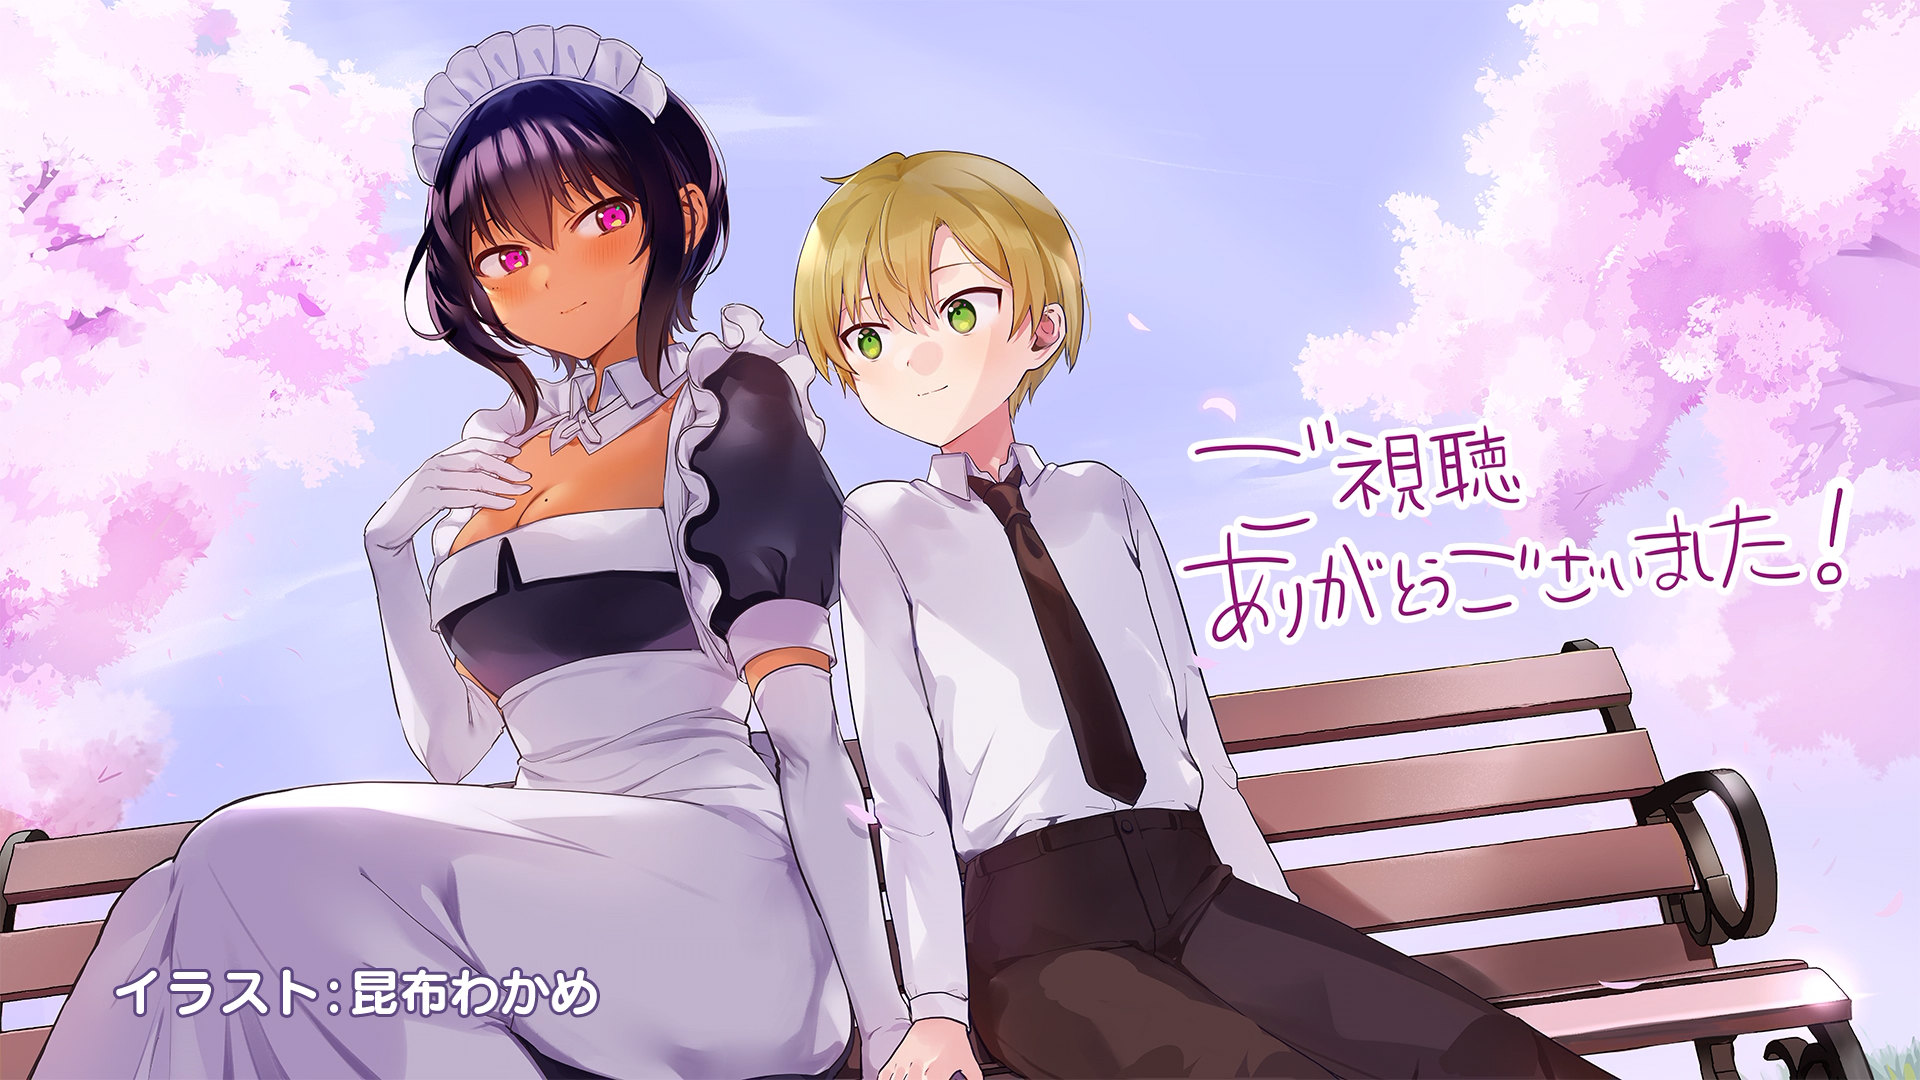 The Maid I Hired Recently Is Mysterious' Reveals Collab Visual With 'The  Little Lies We All Tell' Anime | The Fandom Post